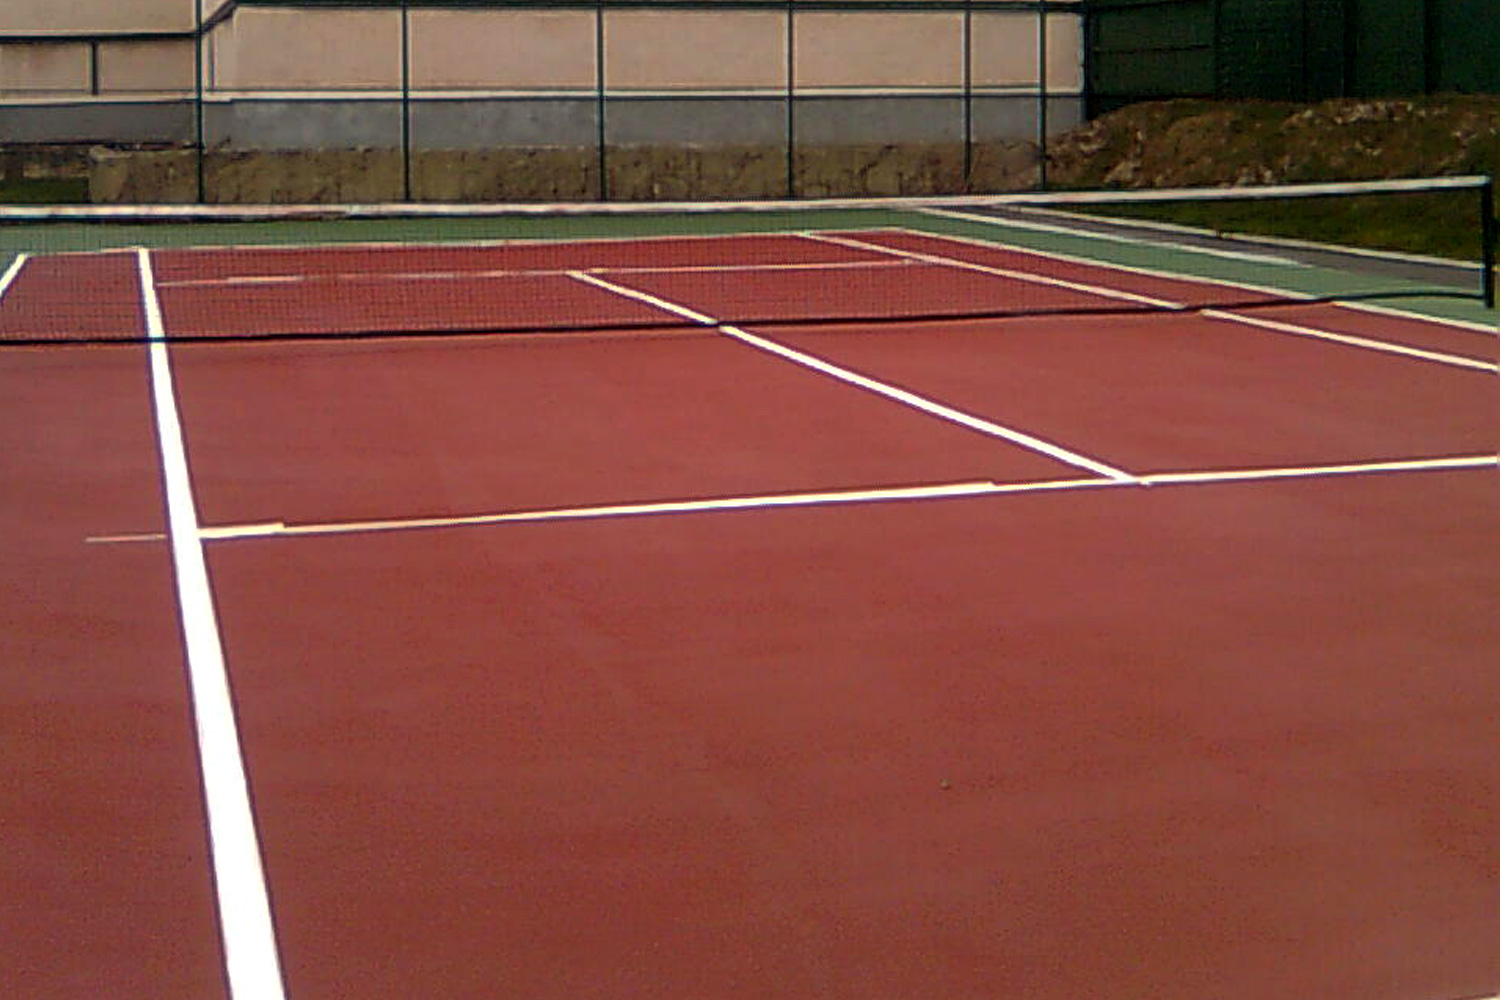 Acrylic Floor Tennis Court, completed by Reform Sports in Romania.